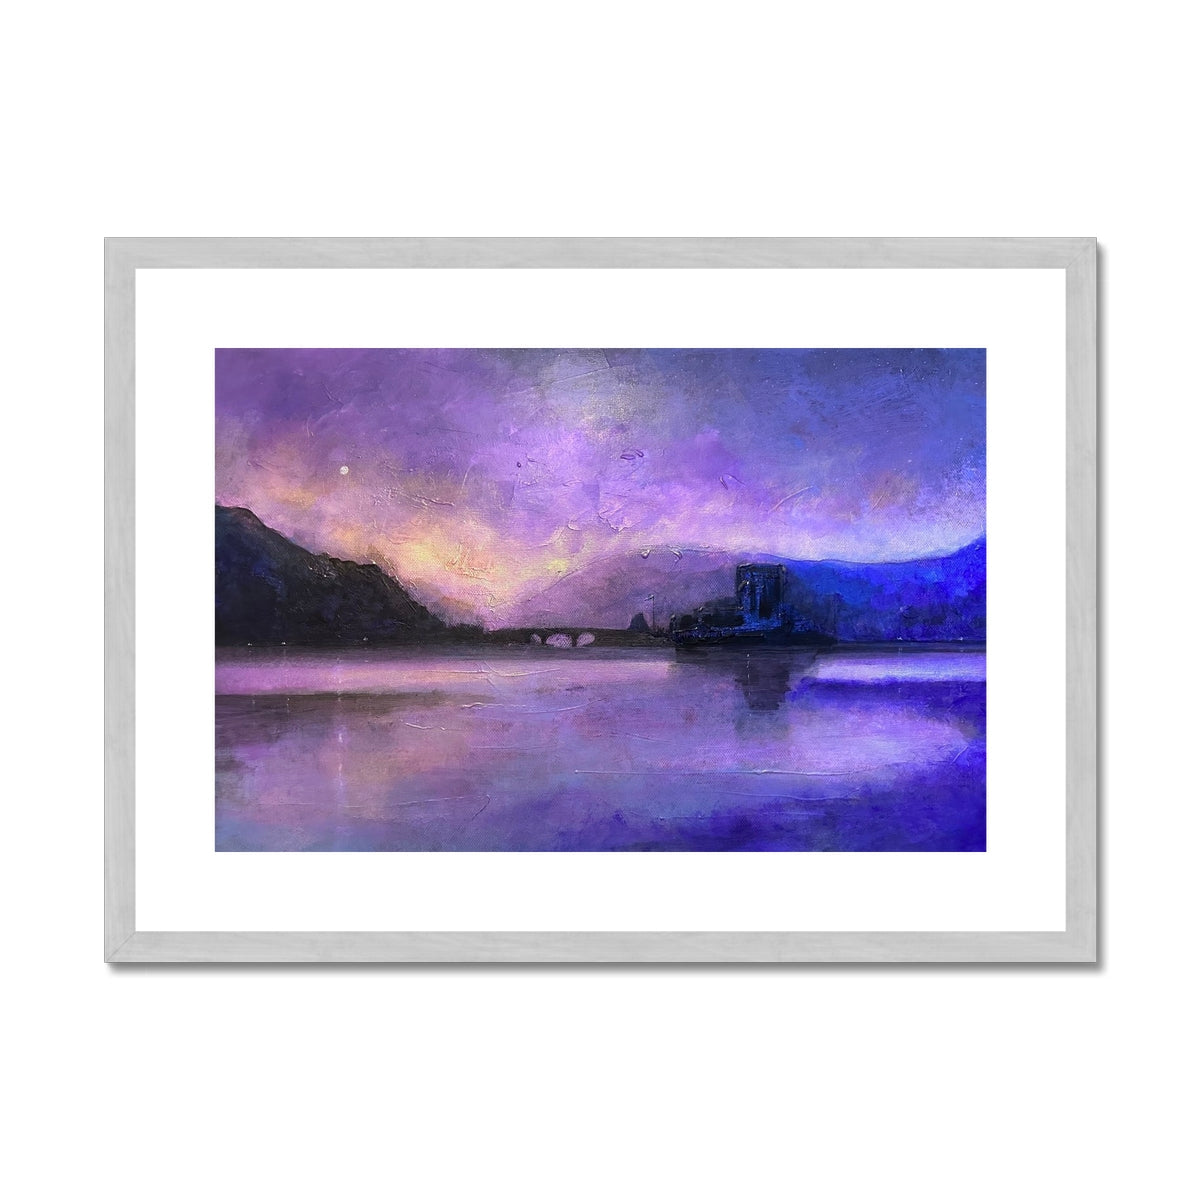 Eilean Donan Castle Moonset Painting | Antique Framed & Mounted Prints From Scotland-Antique Framed & Mounted Prints-Historic & Iconic Scotland Art Gallery-A2 Landscape-Silver Frame-Paintings, Prints, Homeware, Art Gifts From Scotland By Scottish Artist Kevin Hunter